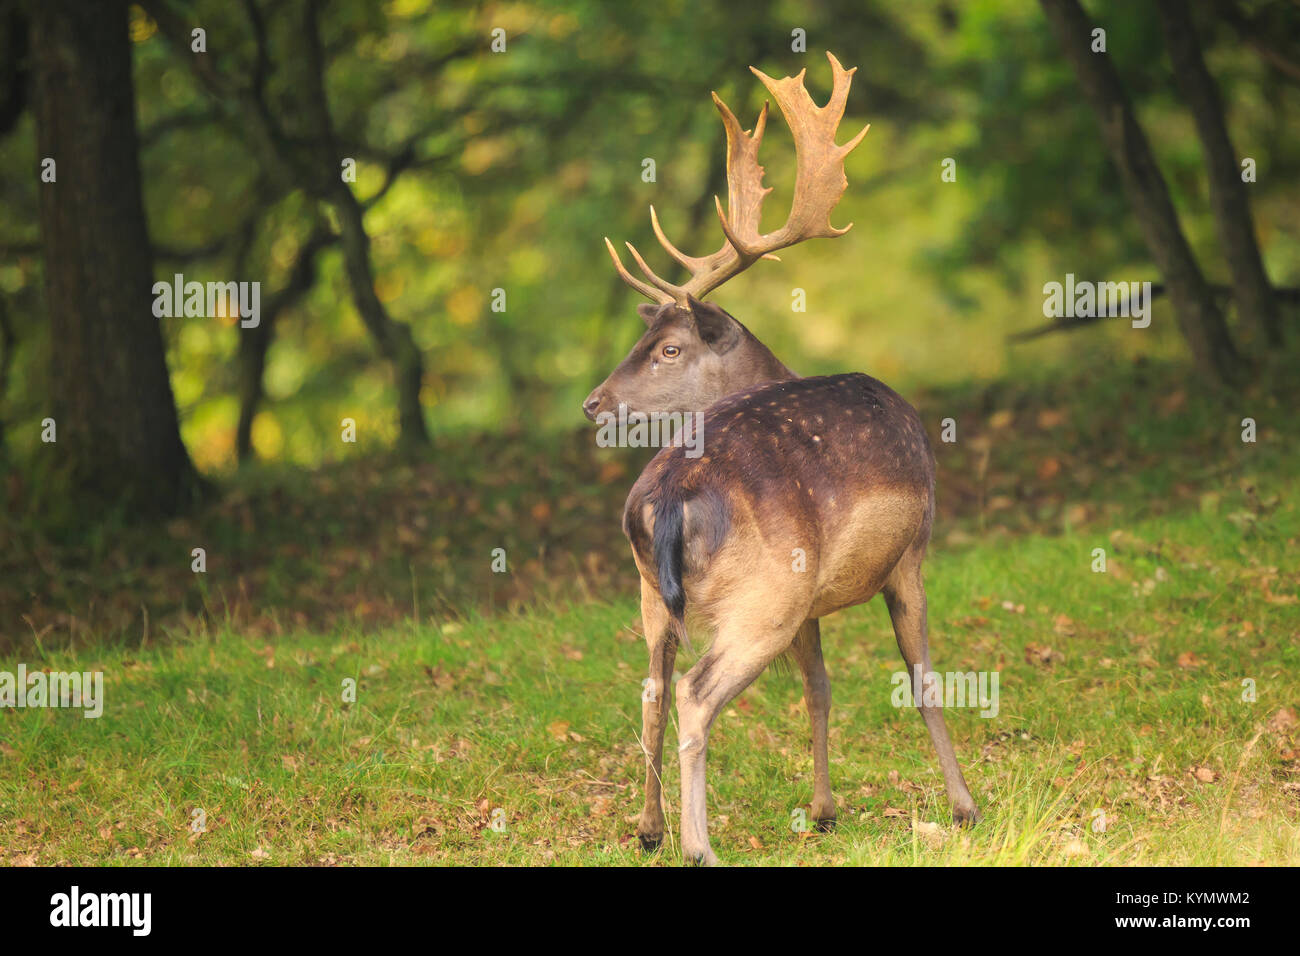 Close up portrait of a male fallow deer stag, Dama Dama, standing in a green forest during Autumn season. Stock Photo